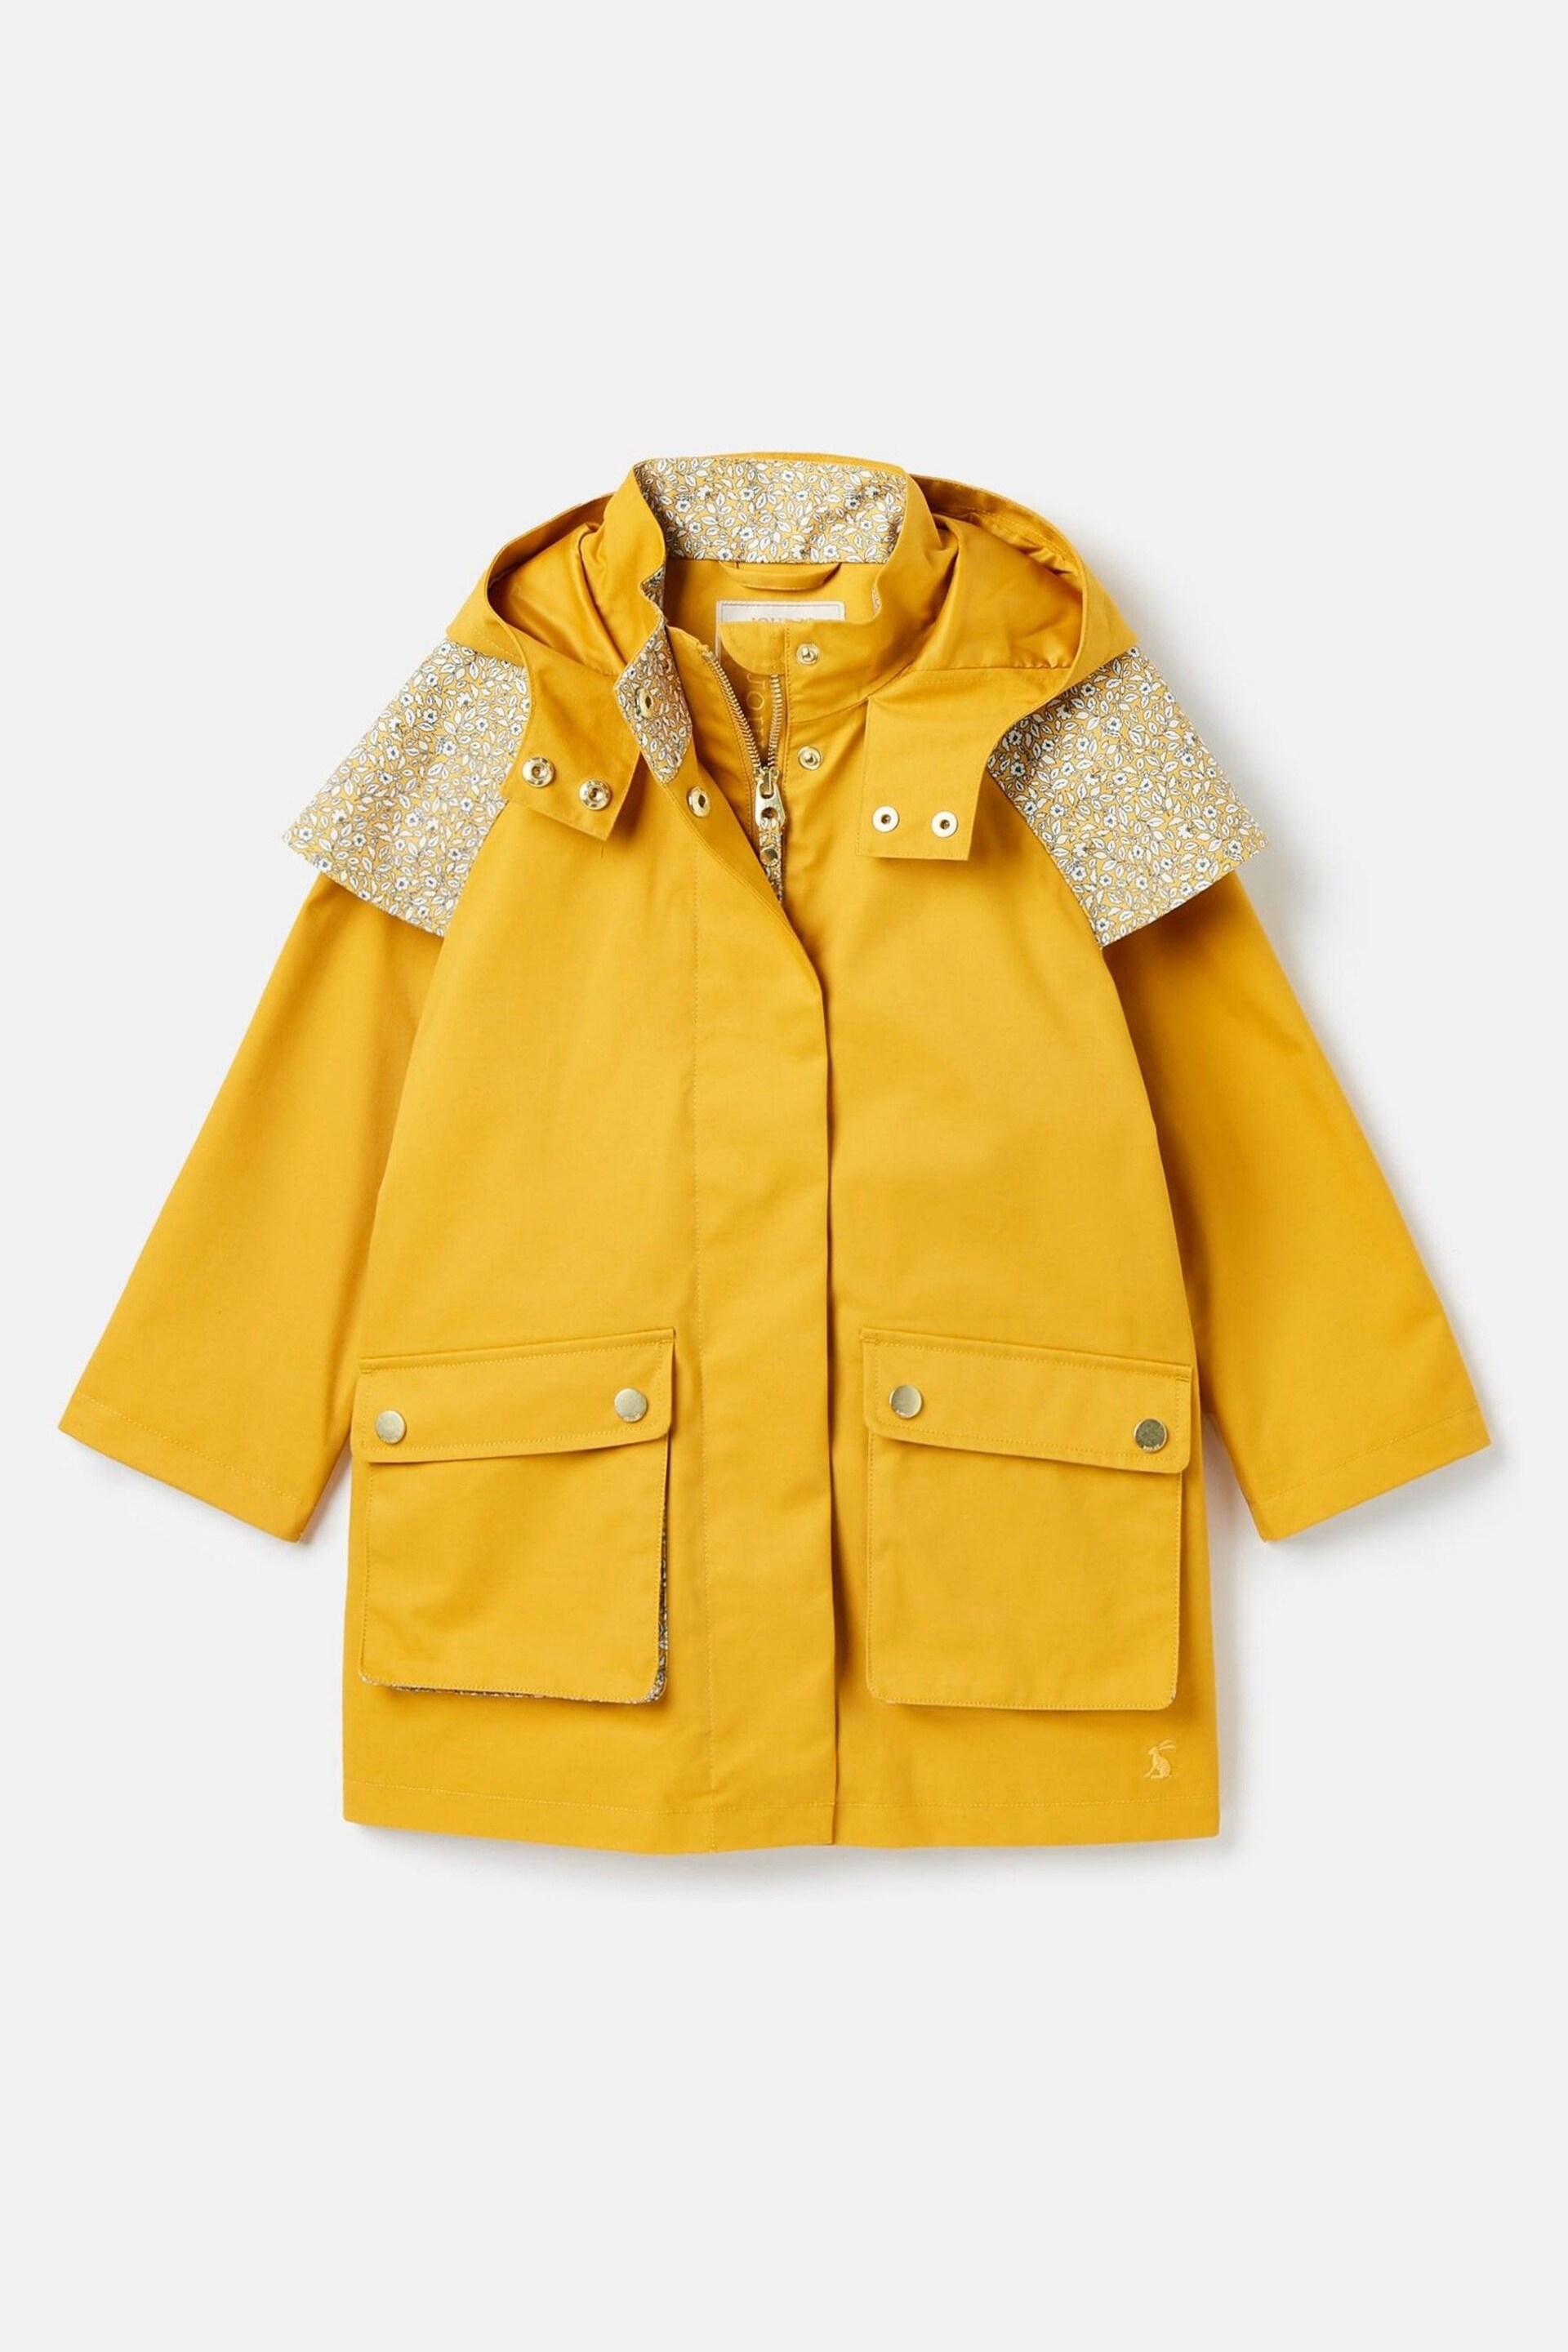 Joules Seacombe Yellow Waterproof Hooded Raincoat with Cape - Image 7 of 13